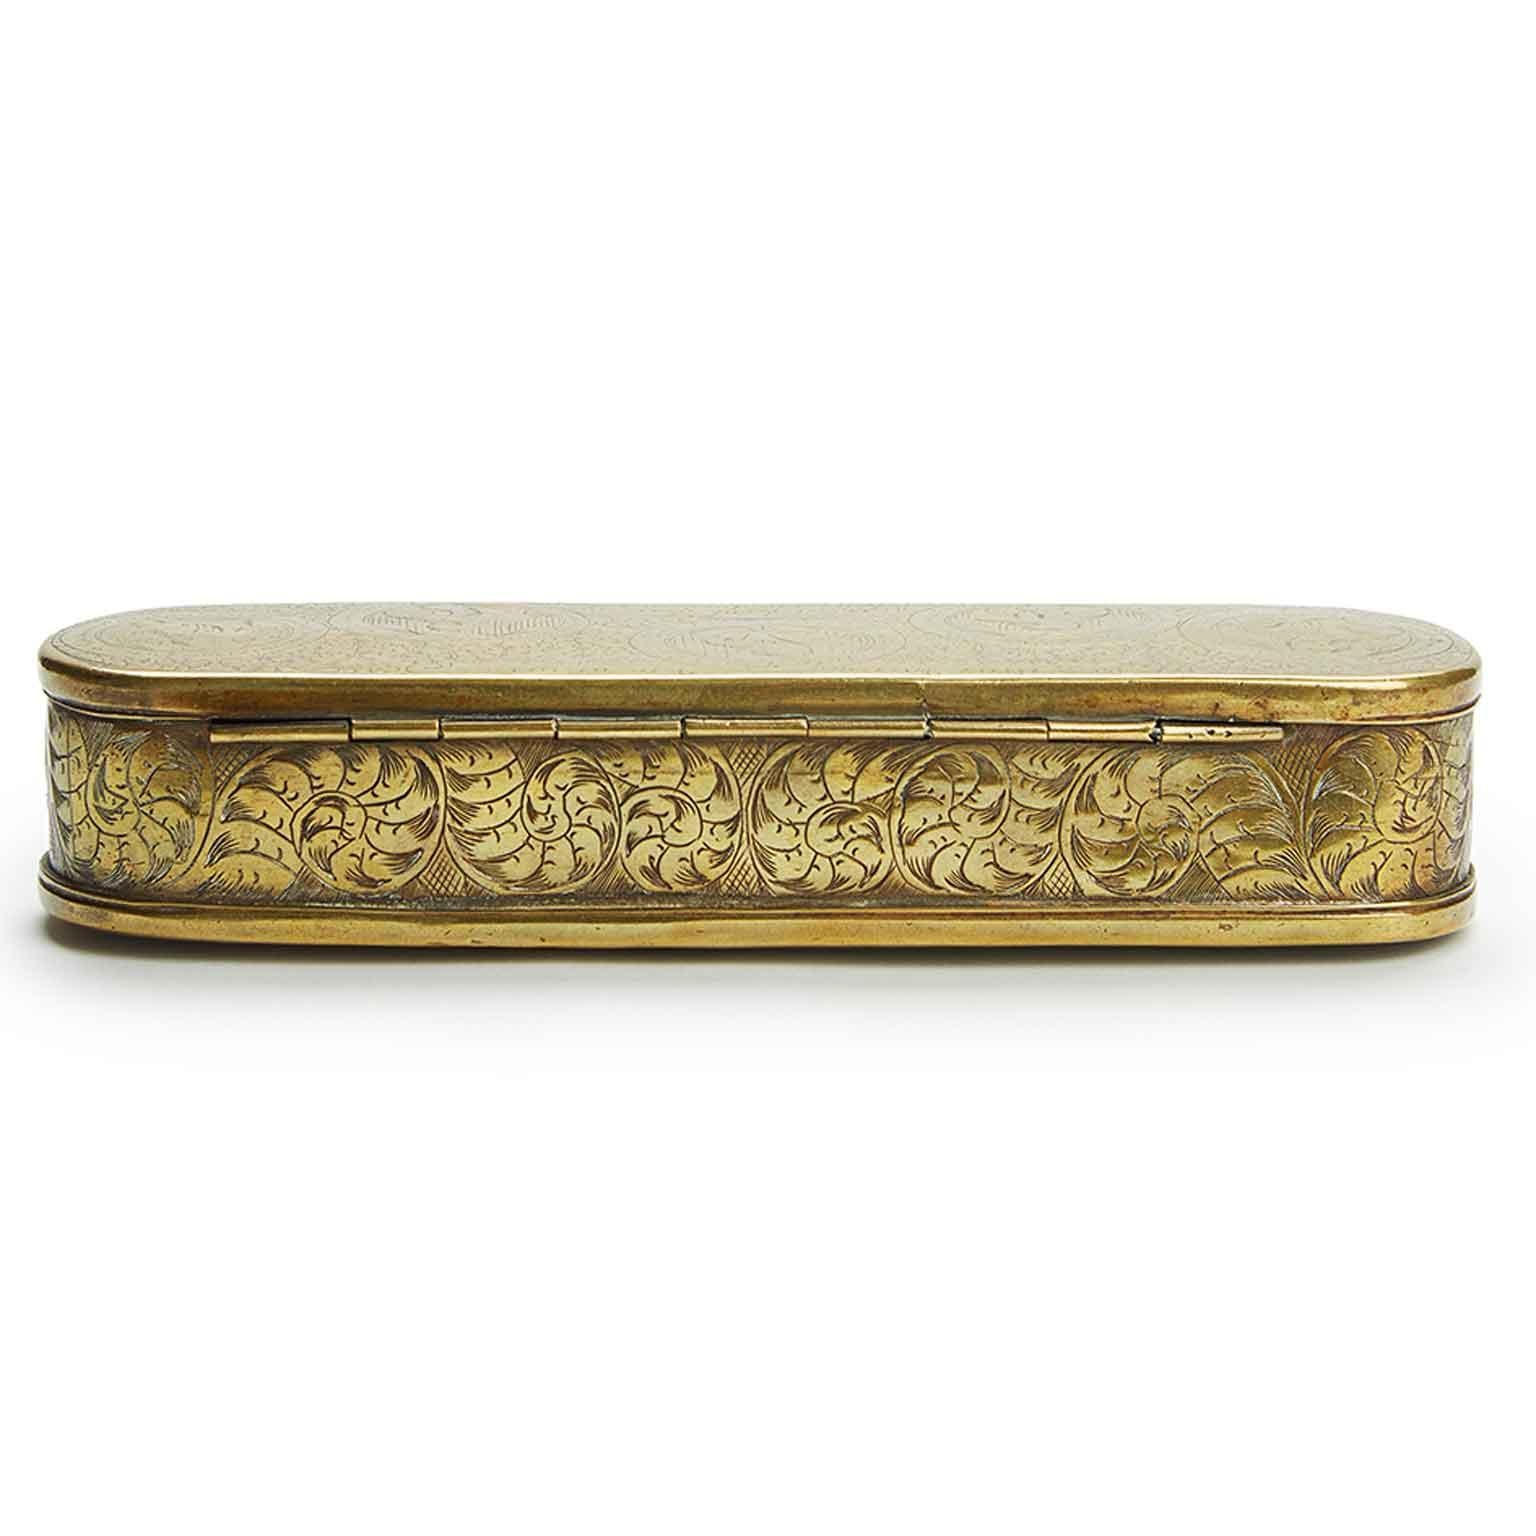 18th century Dutch brass tobacco box with hinged lid engraved with five circular medallions containing the busts of male noblemen figures with inscriptions and dates, the most recent date is 1748. Dutch Engraved Brass Tobacco box from 1700 of